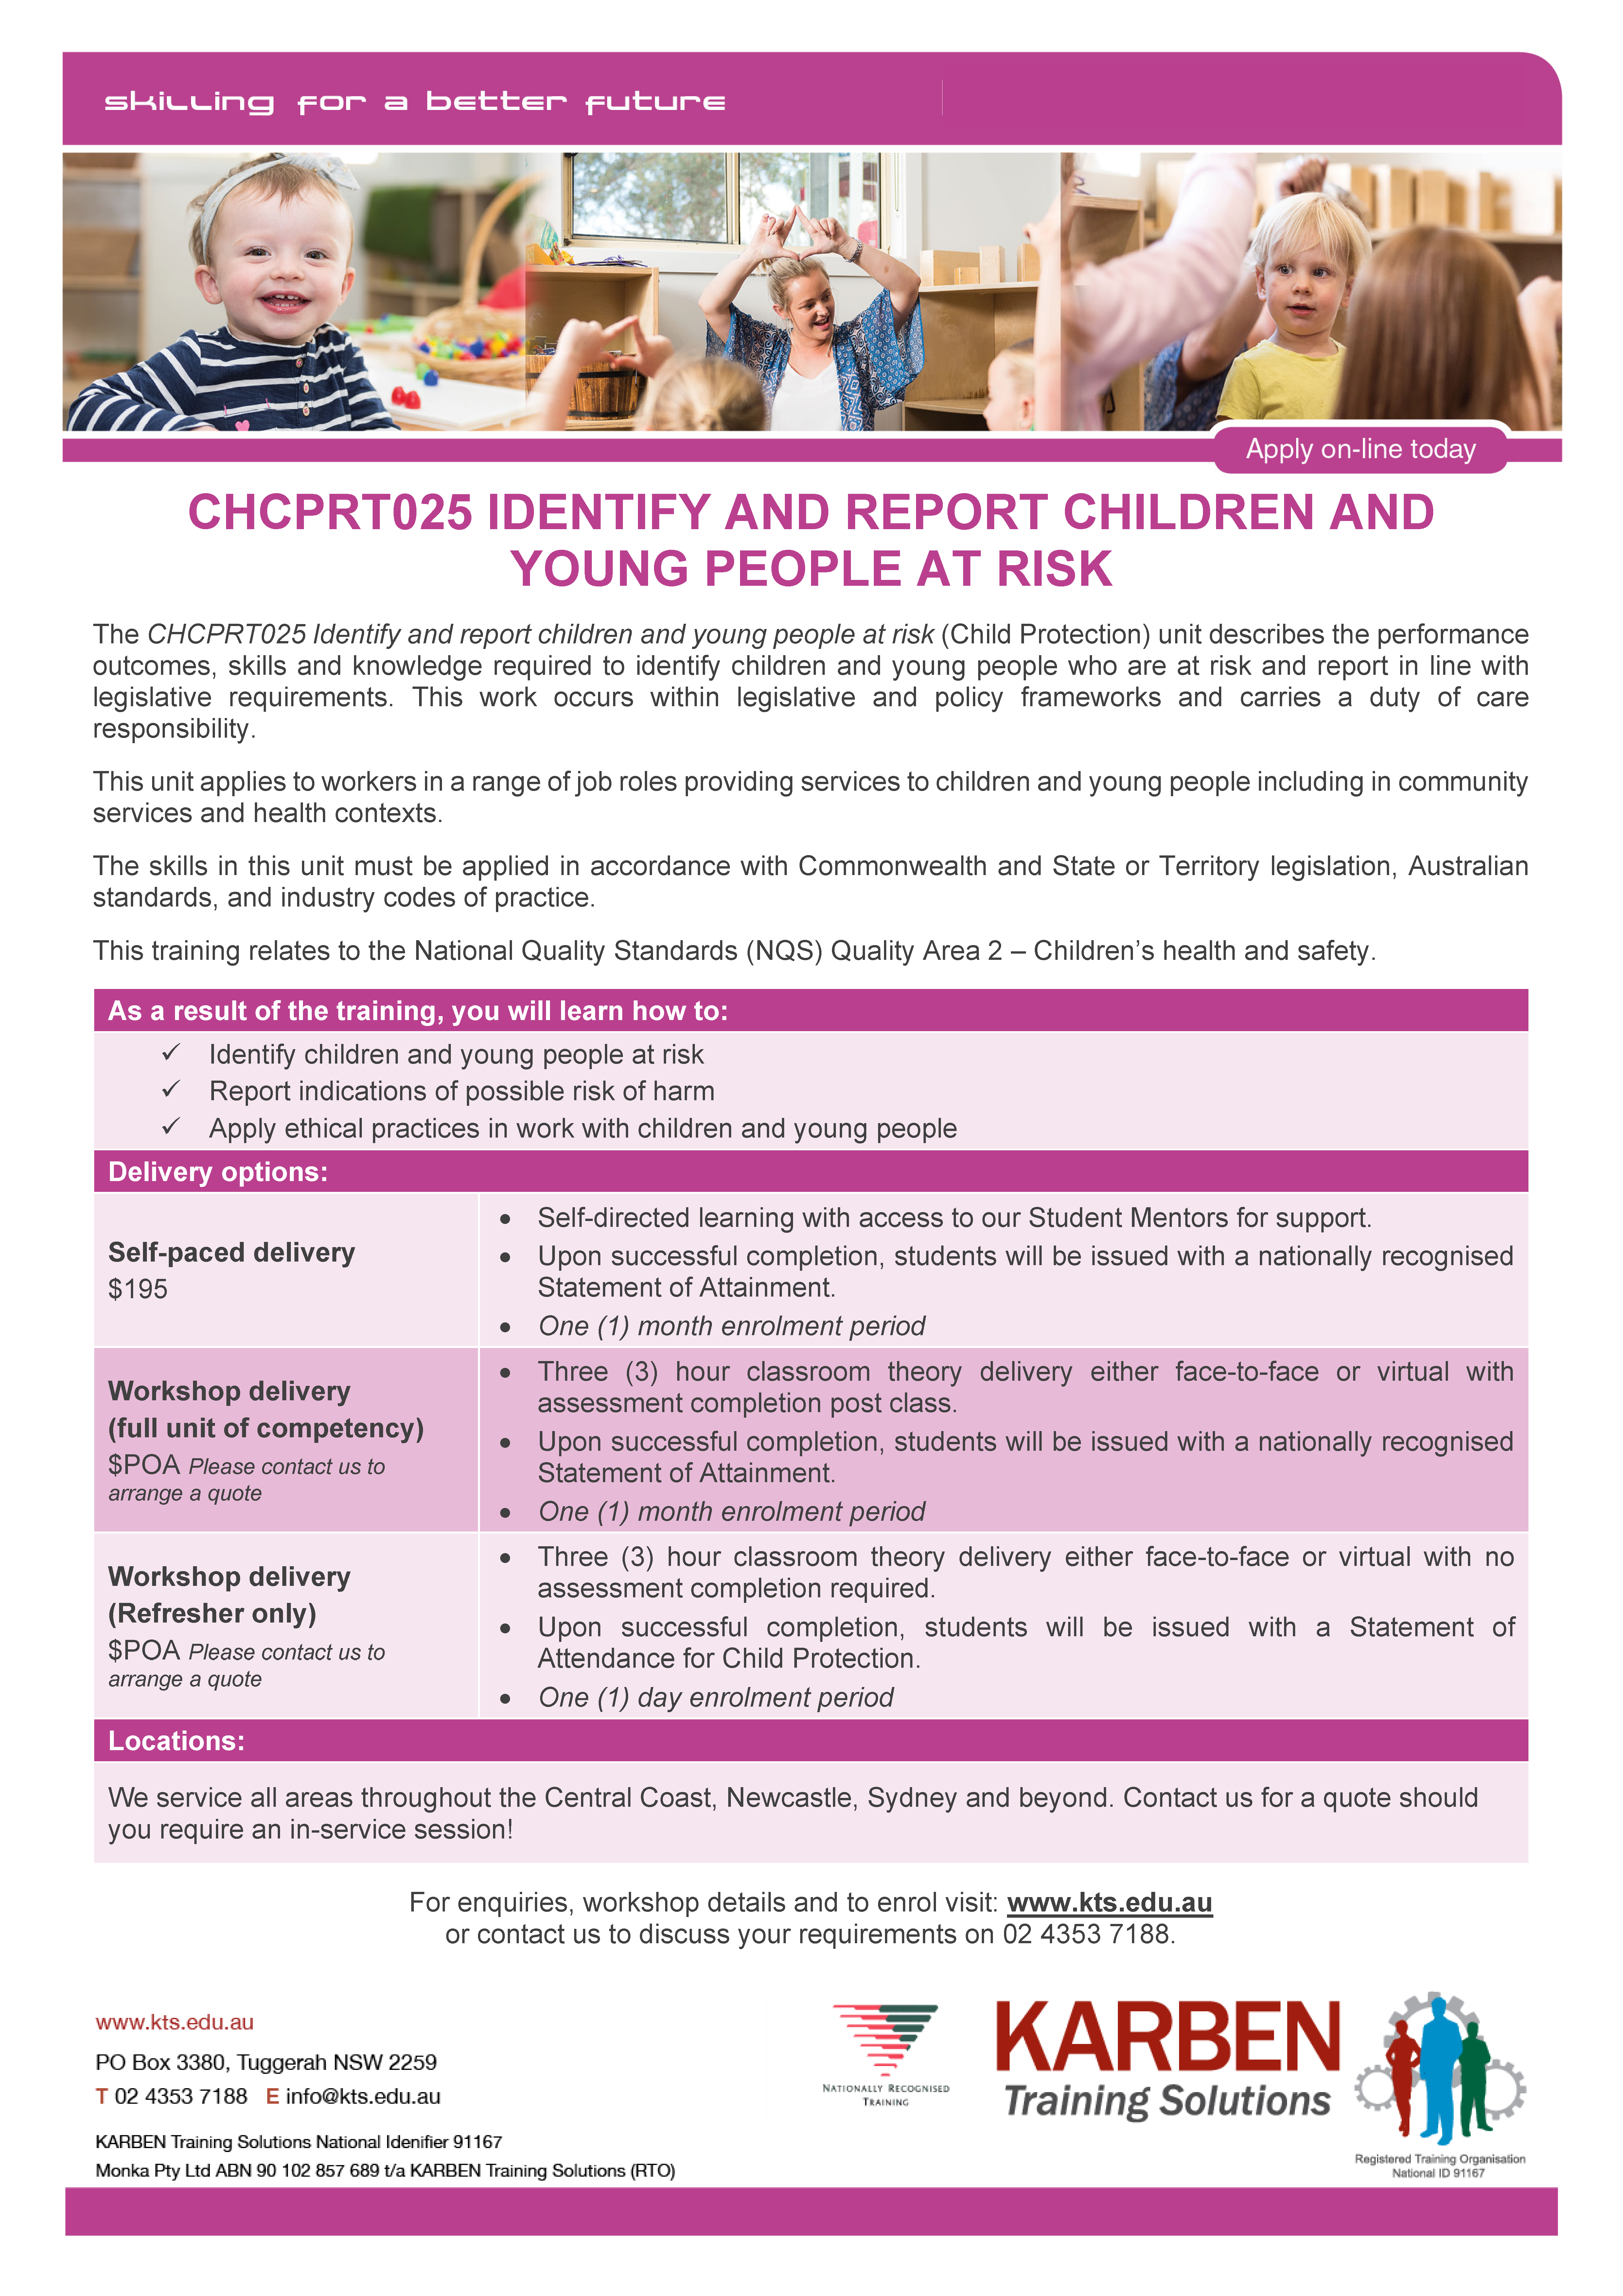 CHCPRT025 Identify and report children and young people at risk